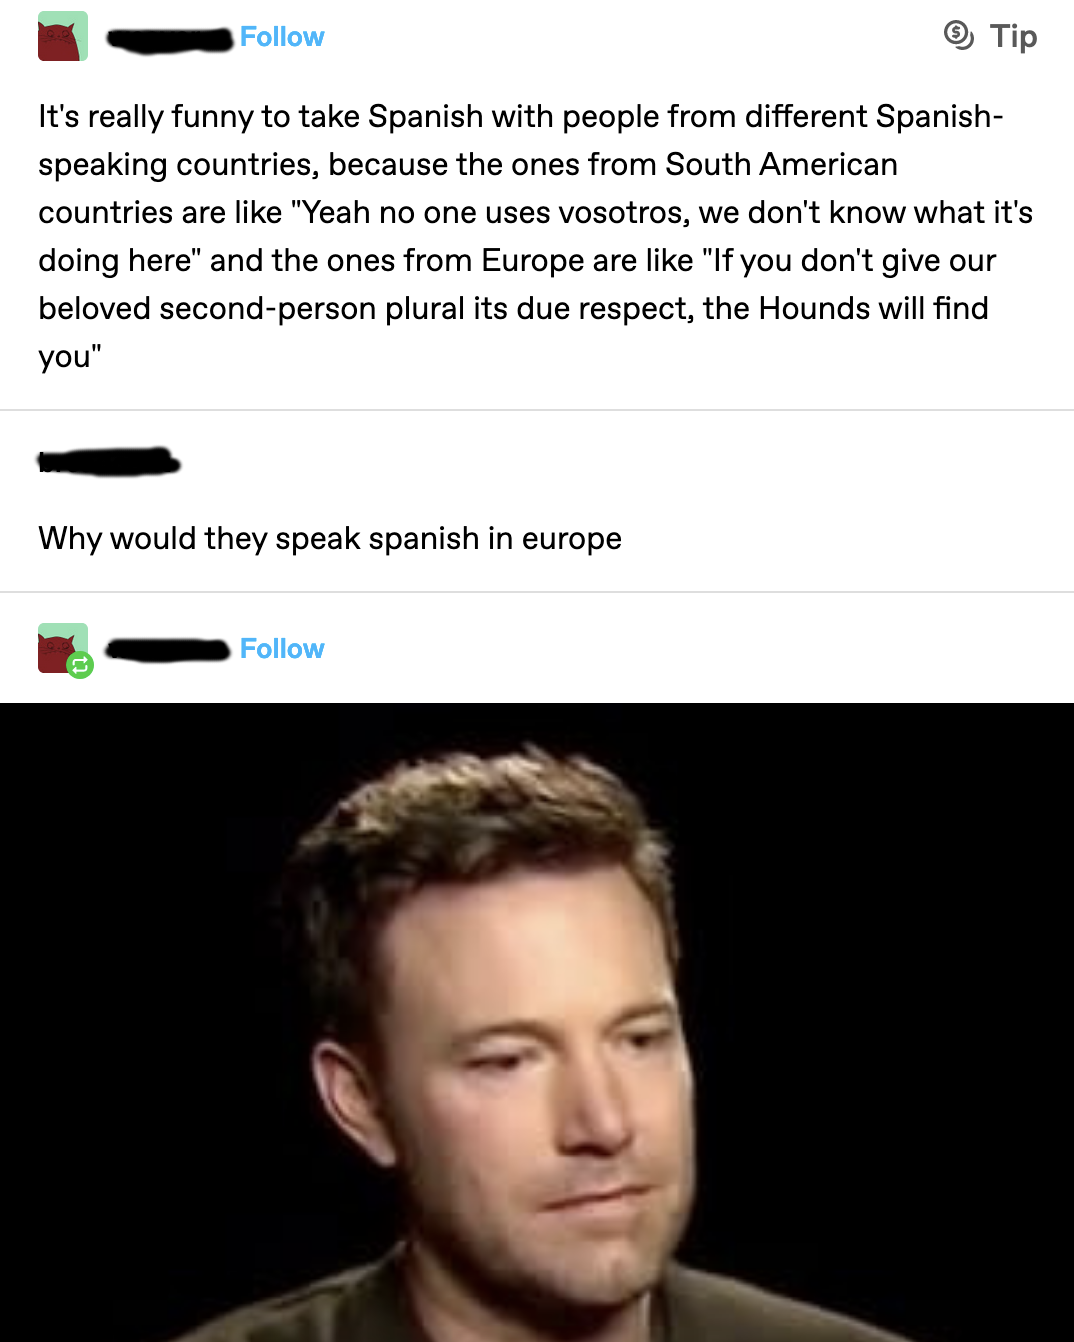 Person who asks why they speak Spanish in Europe